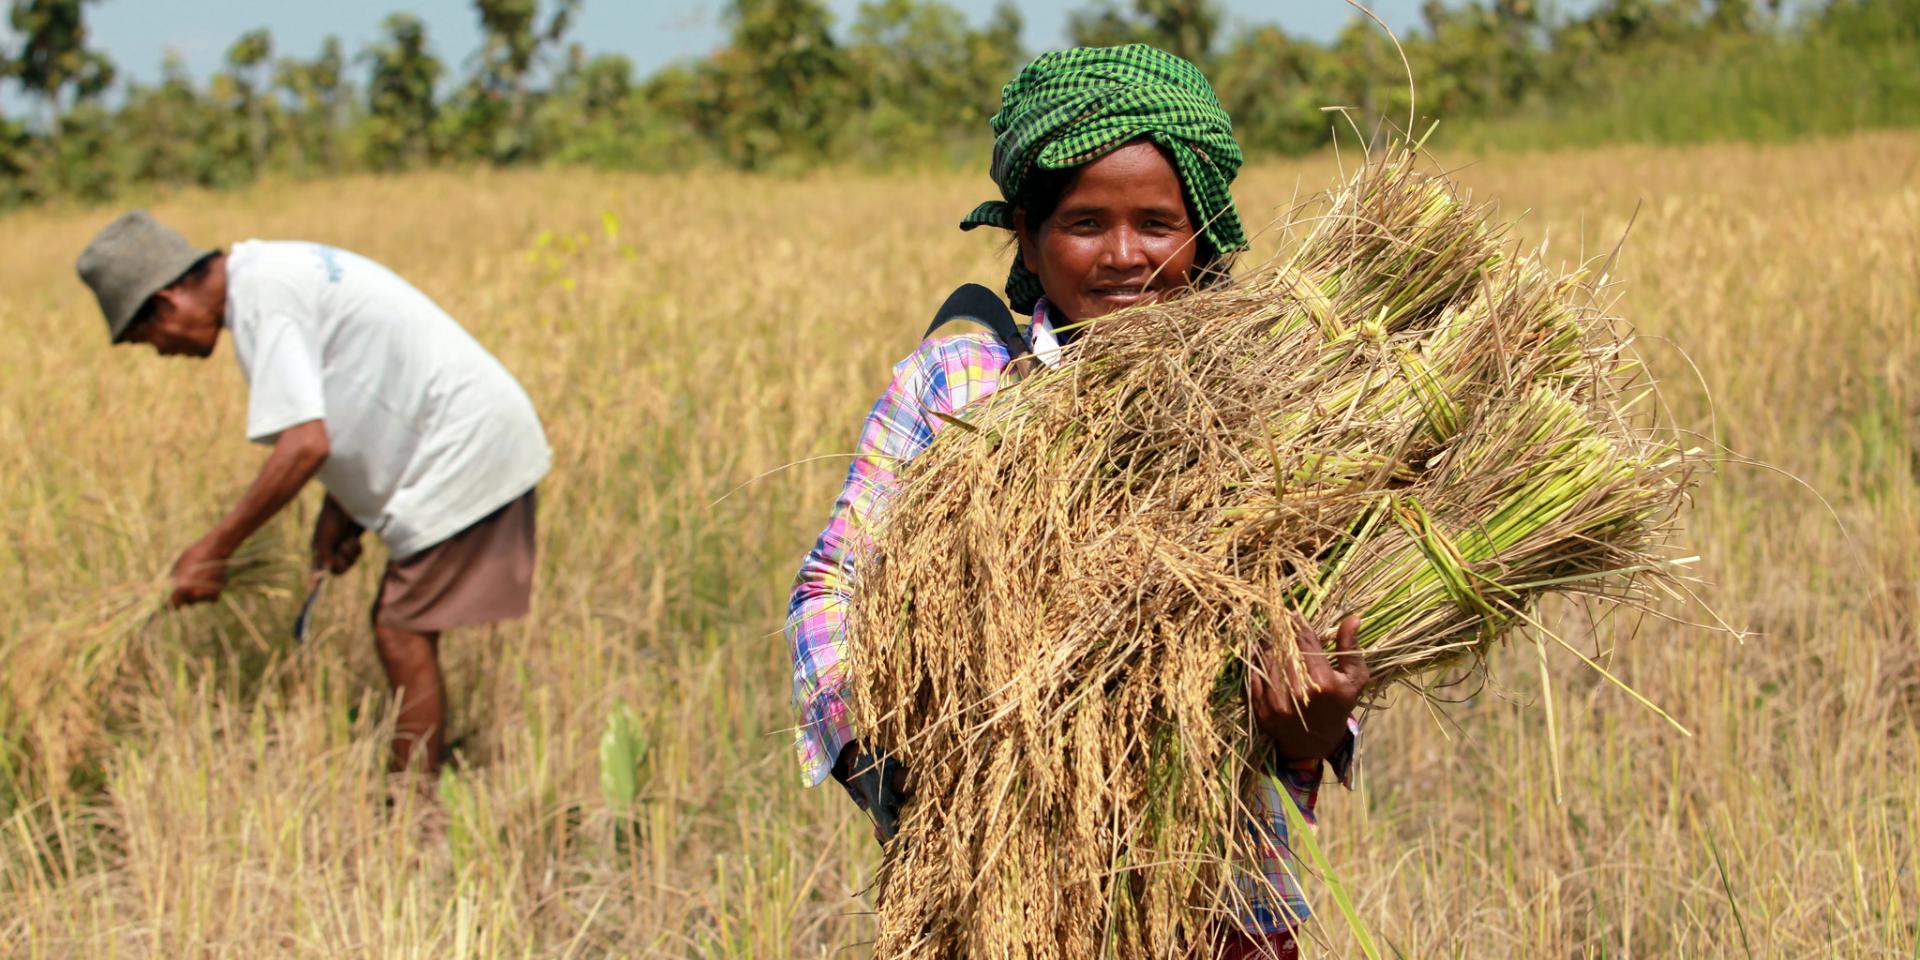 A Cambodian farmer Men Leng, 40, gets her first harvest with her husband, Rethy Chey 54, in Prey Thom village